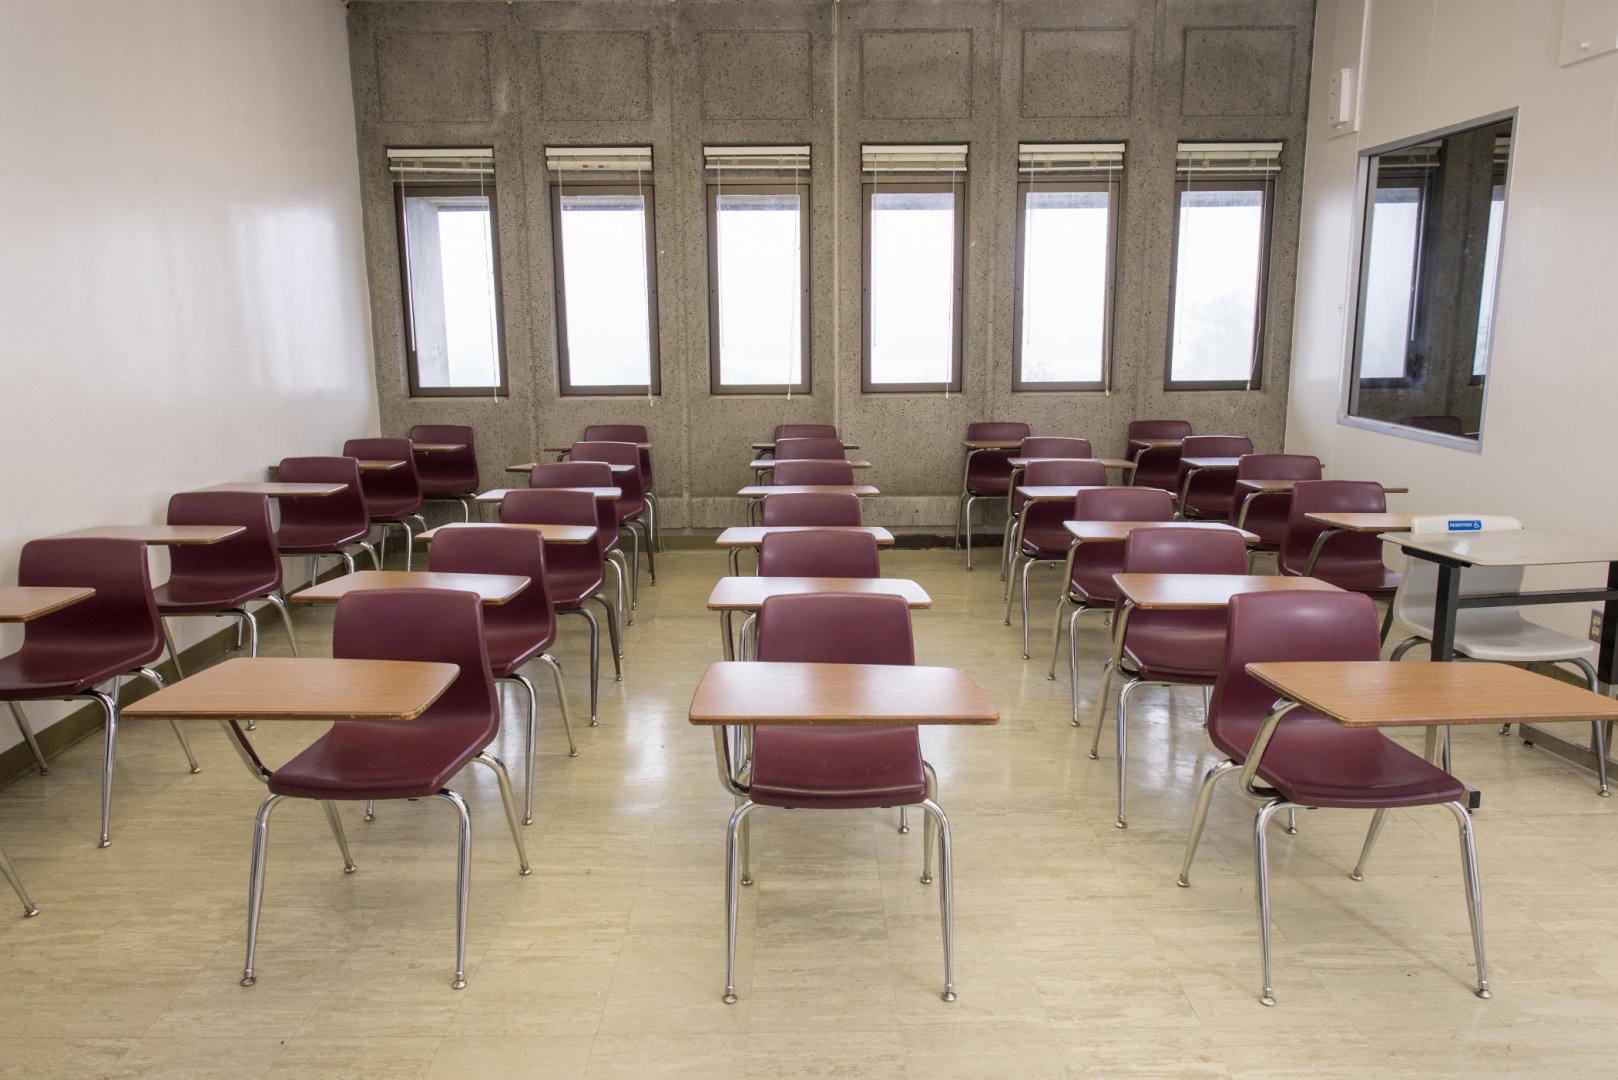 Rows of desks are lined up inside a classroom.